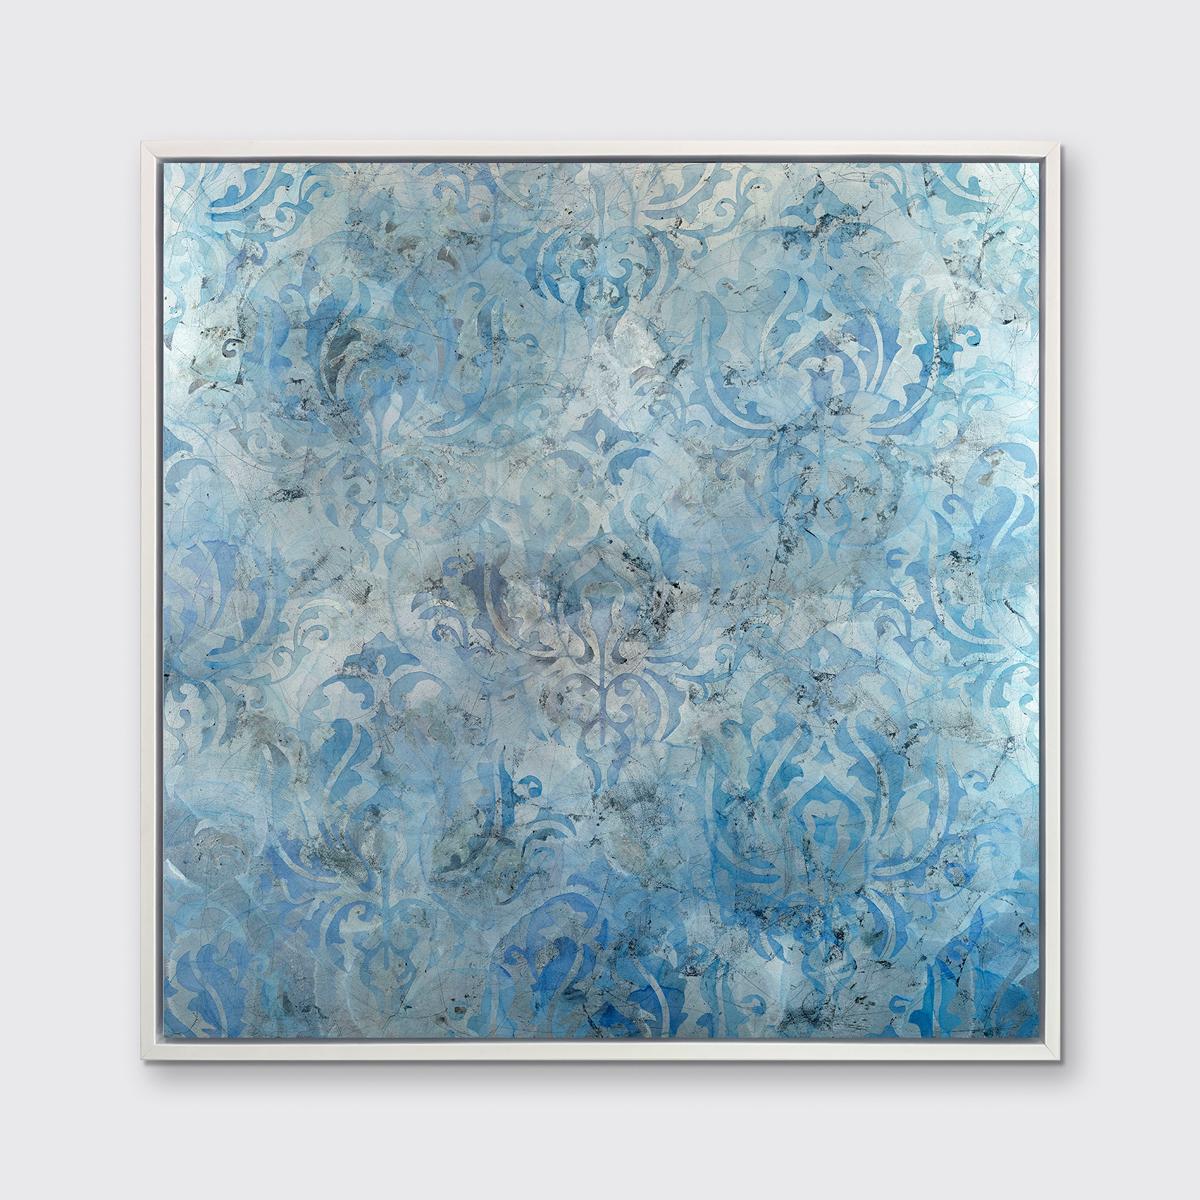 This limited edition print by Roger Mudre features a cool blue and silver palette and is part of Mudre's Venezia series, which is inspired by his recent trip to the Northern Italian city. In it, Mudre weaves his signature exploration of the circle